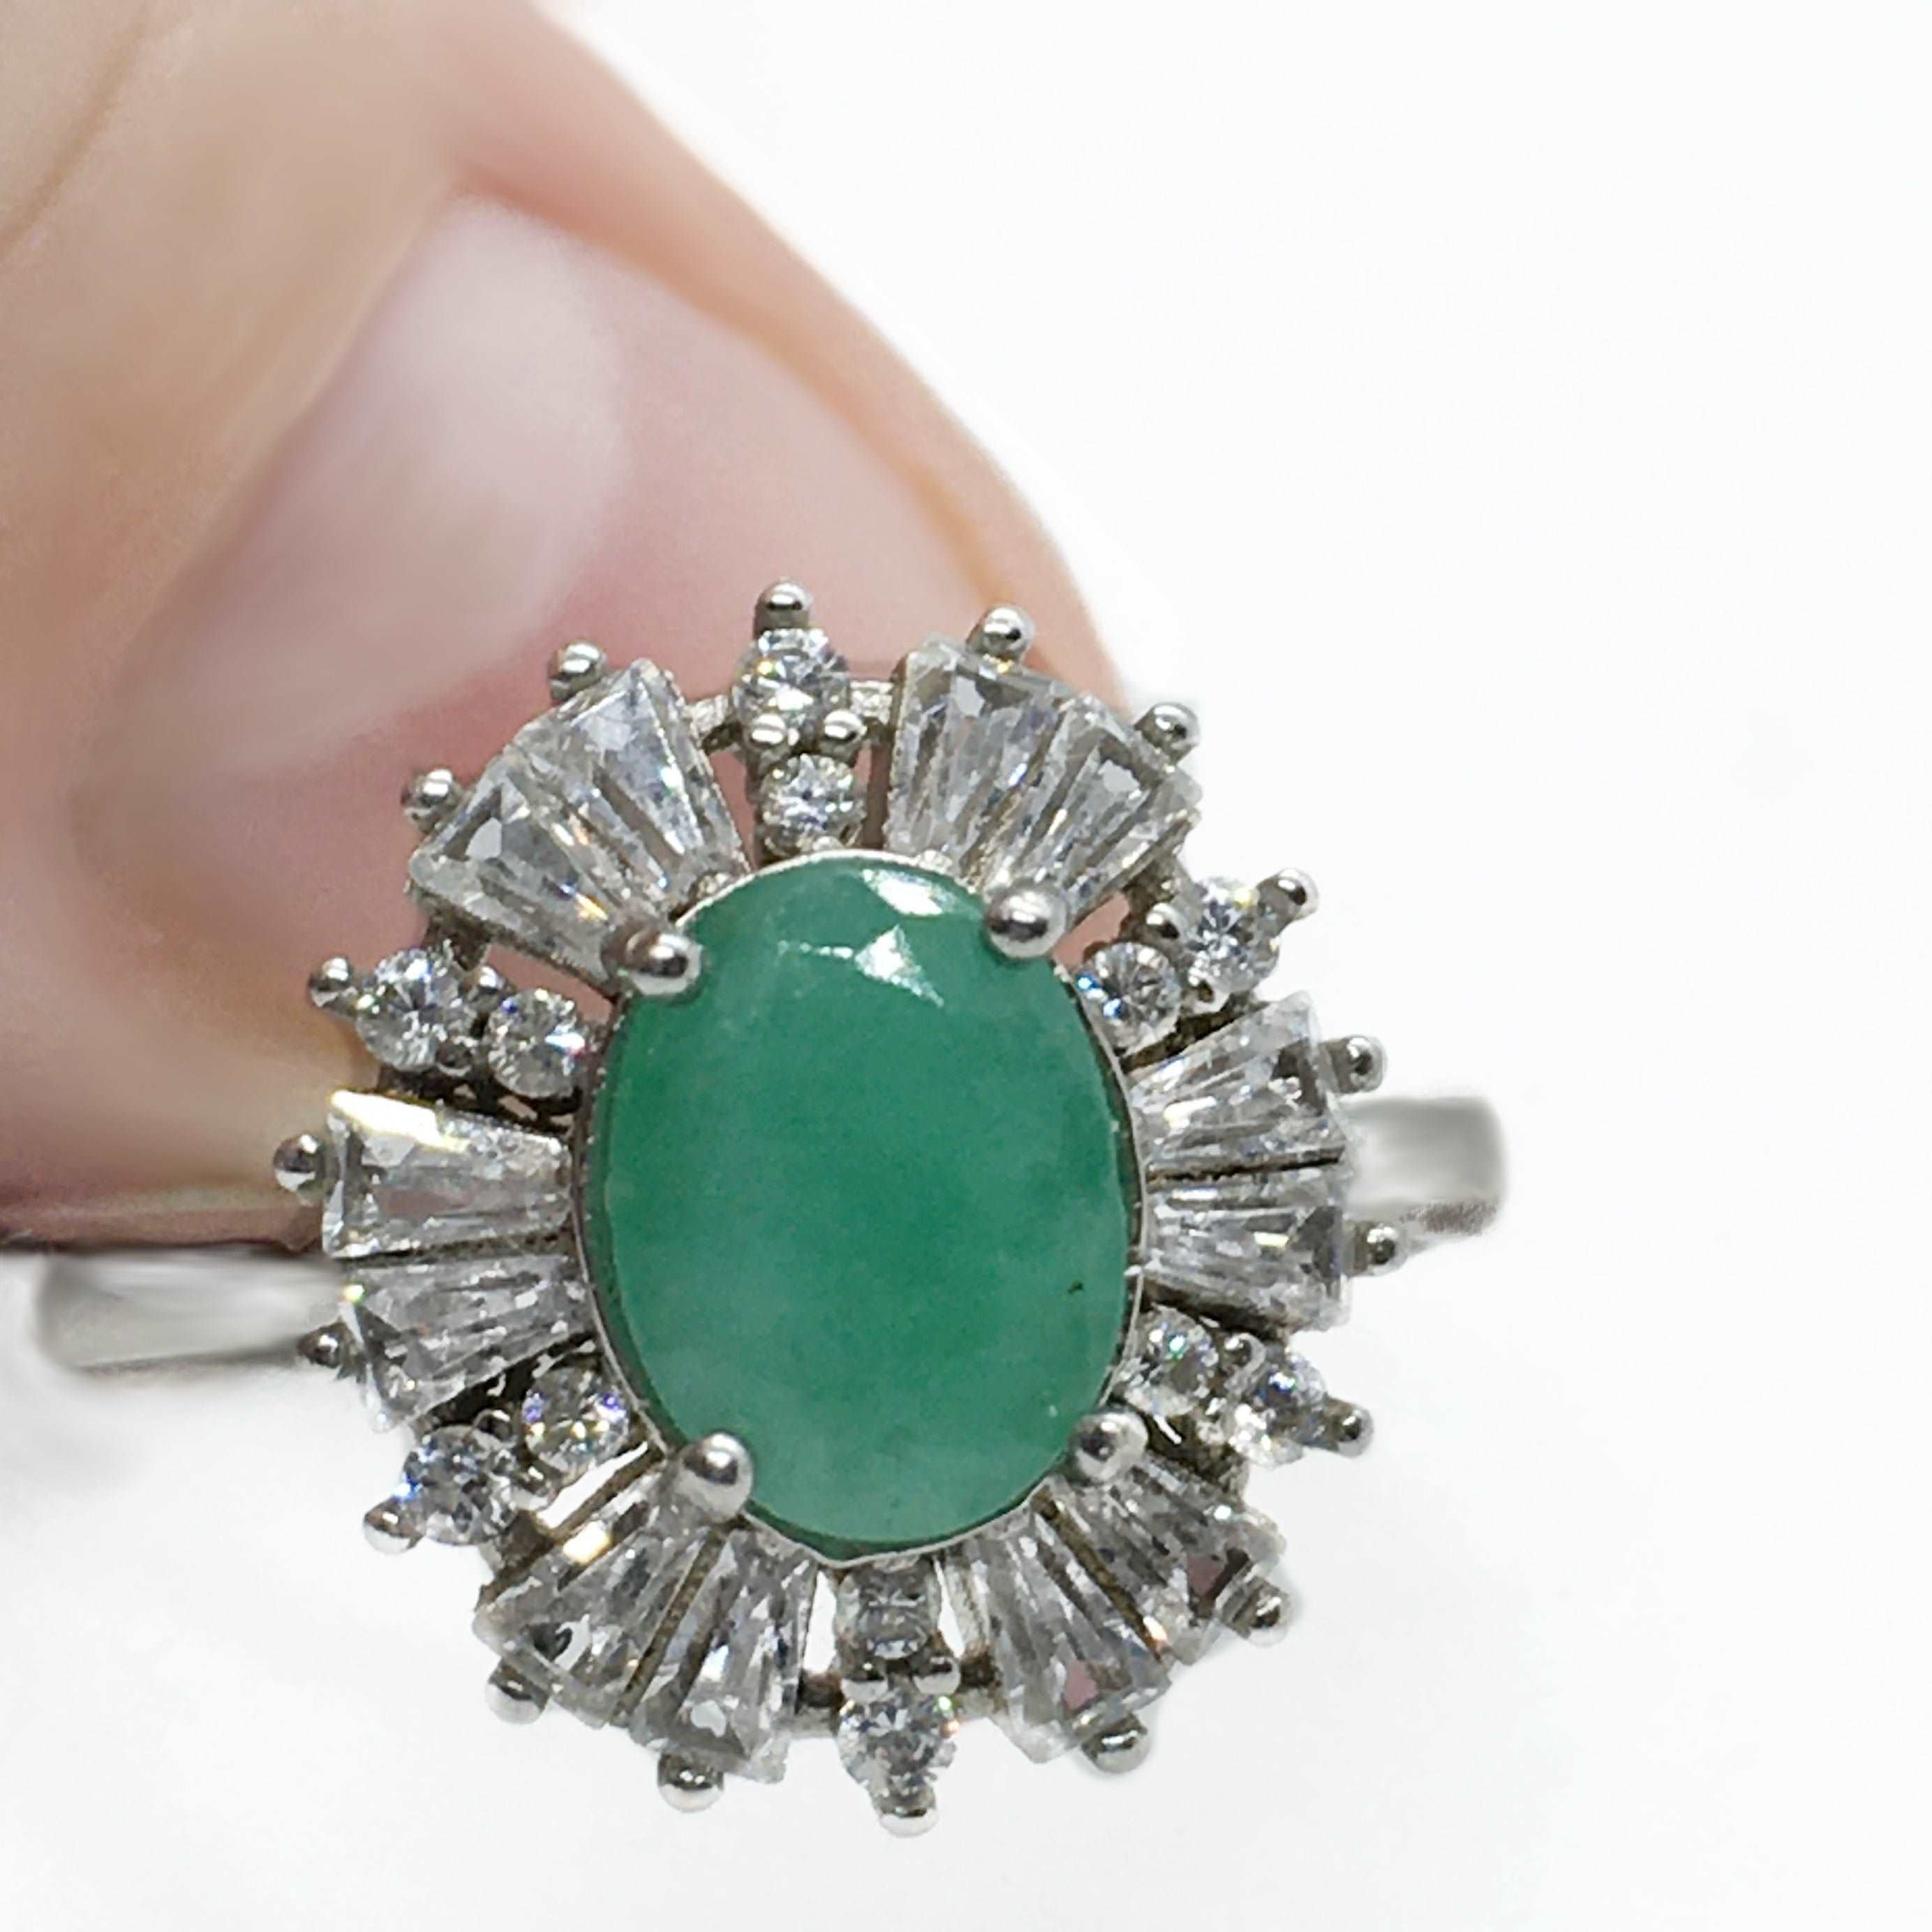 AAA Natural Zambian Emerald, Cubic Zirconia Solid .925 Sterling Silver Ring Size 7 or O